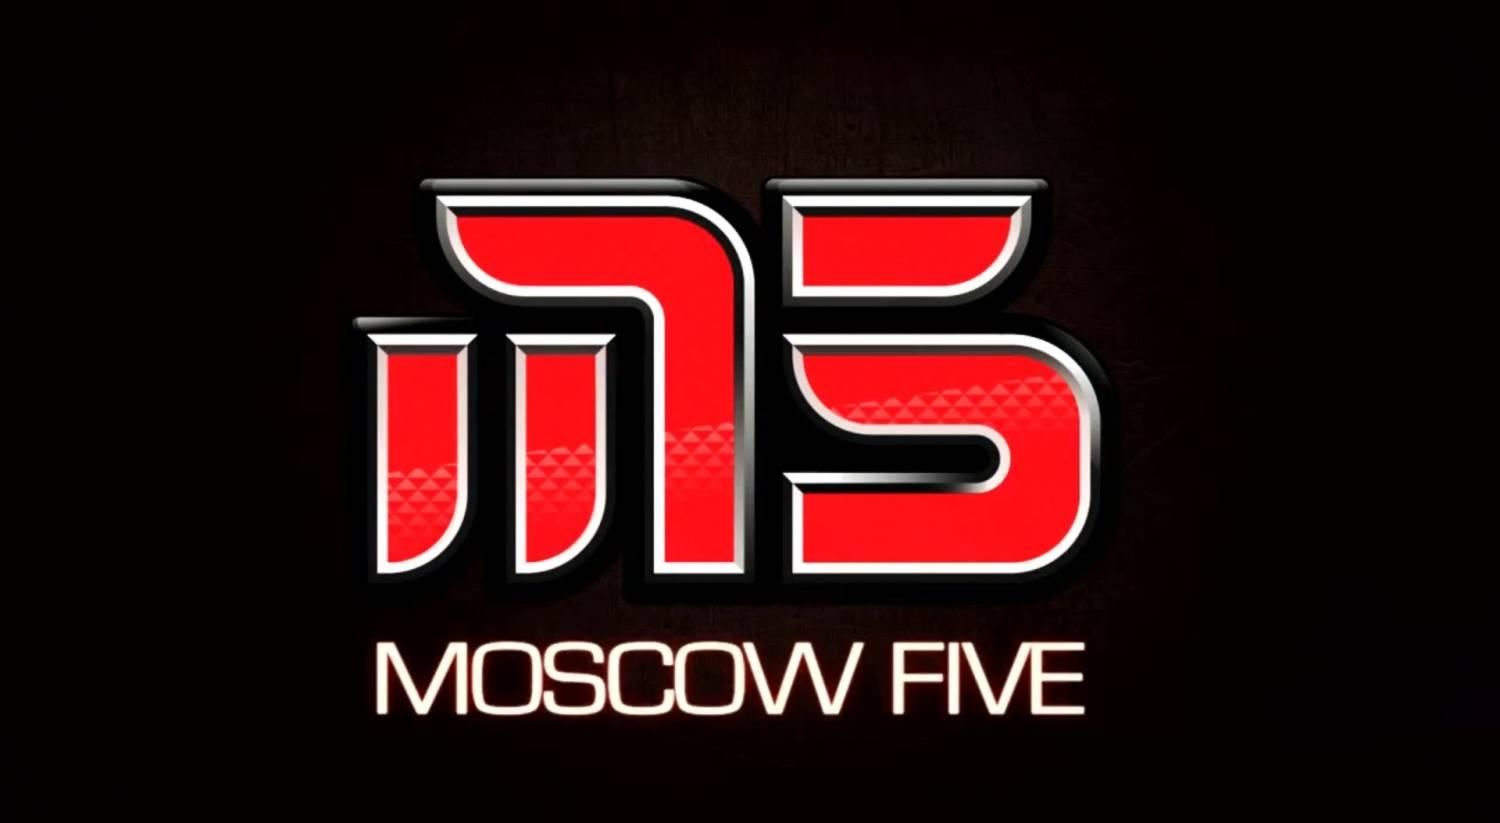 Moscow five